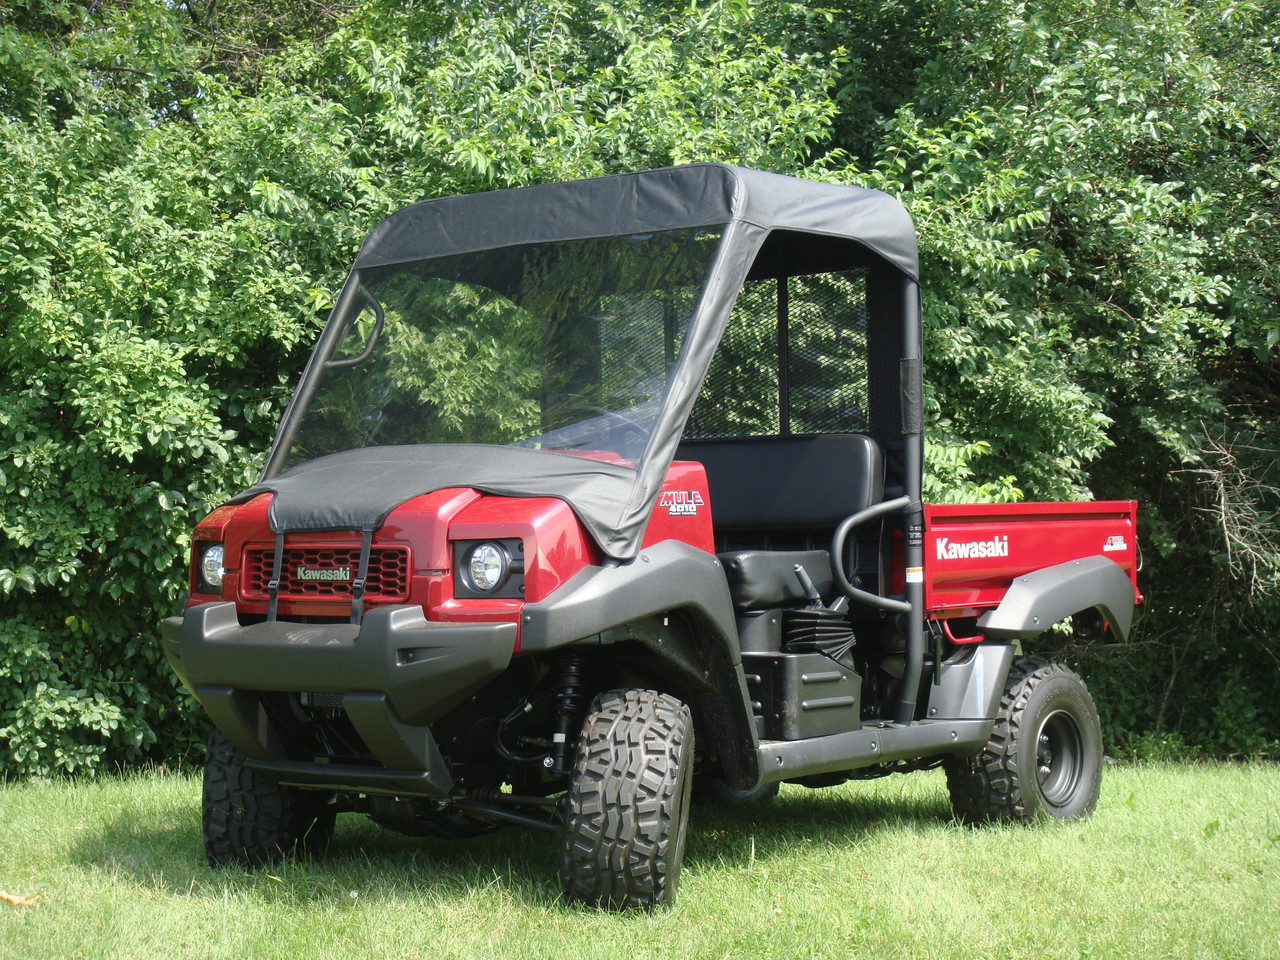 3 Star side x side Kawasaki Mule 4000/4010 vinyl windshield top and rear window front and side angle view